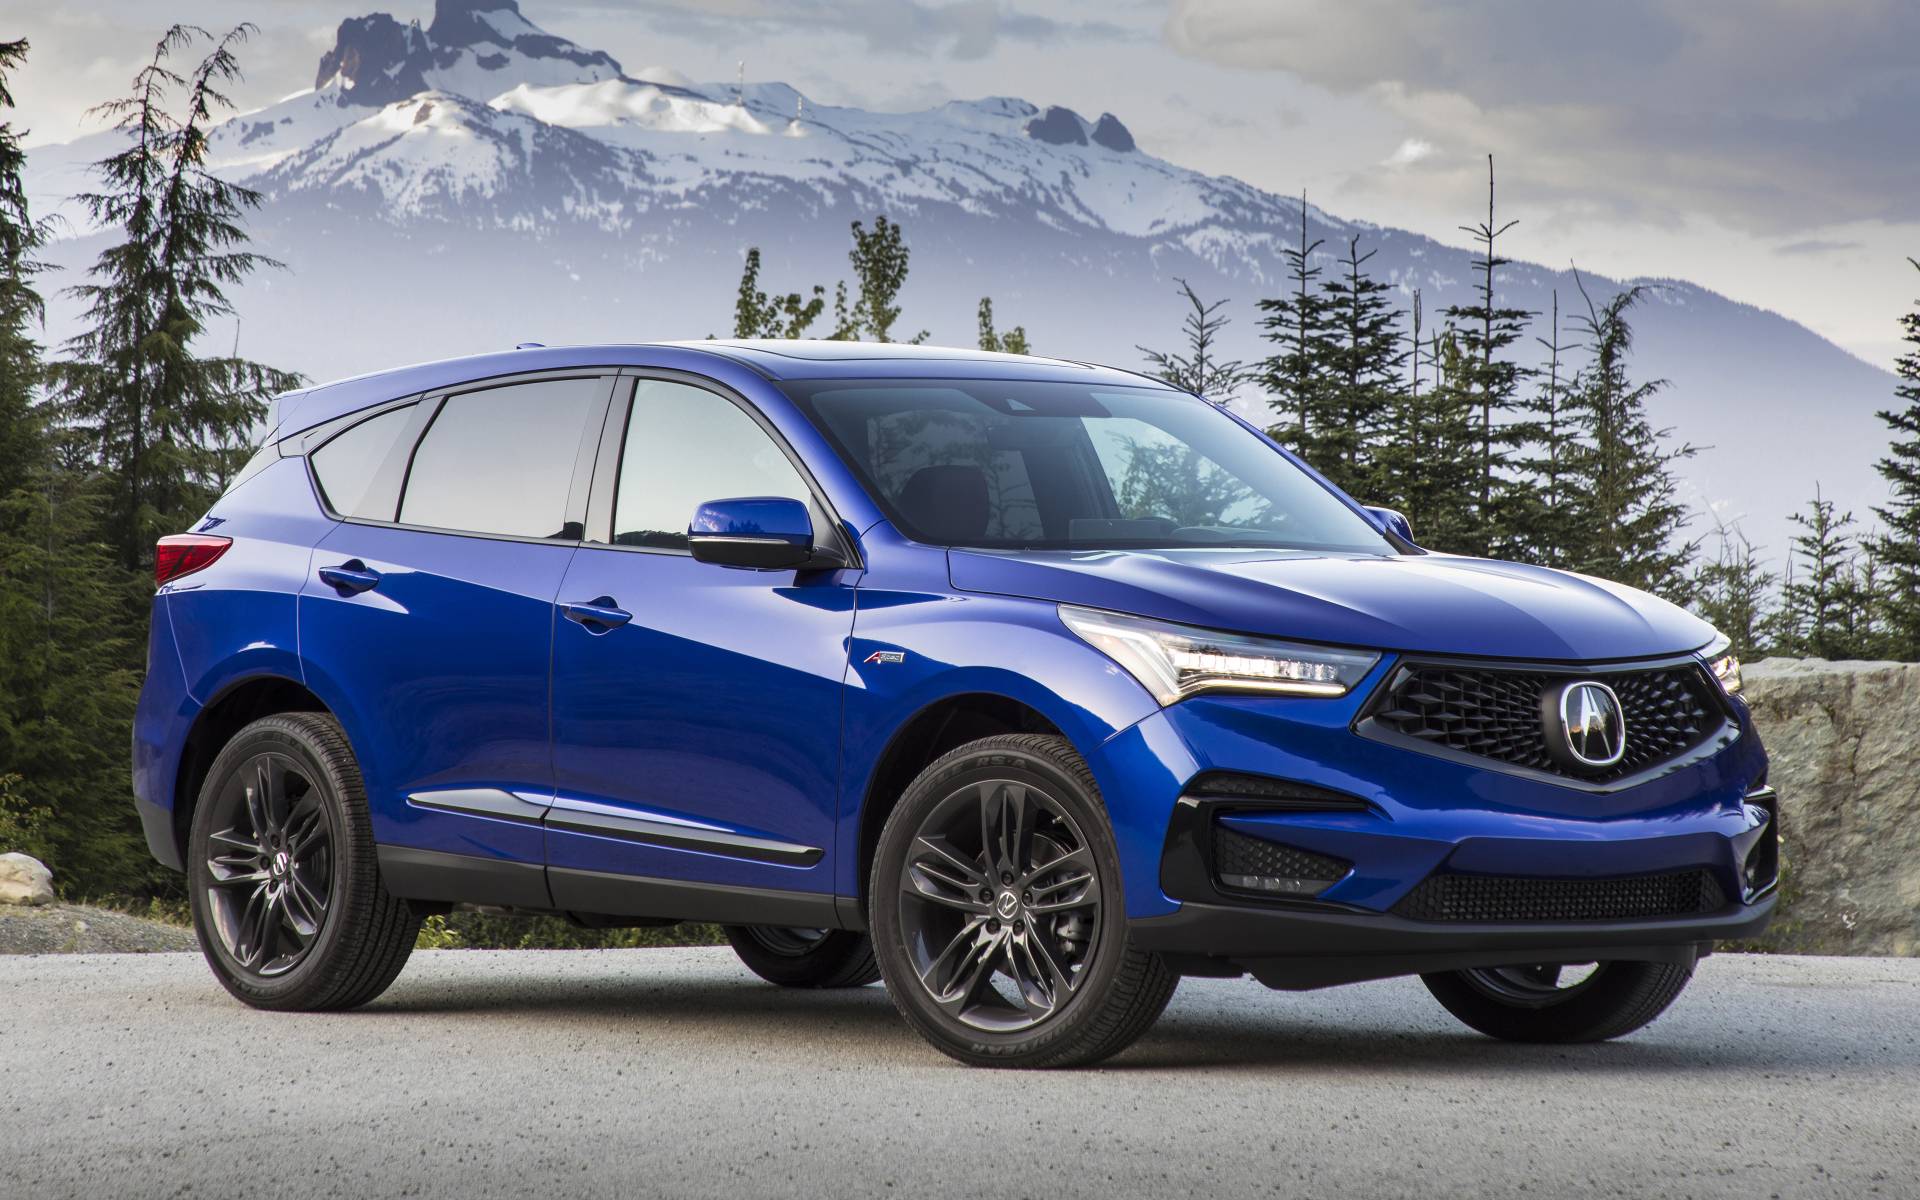 2020 Acura RDX - News, reviews, picture galleries and videos - The Car Guide